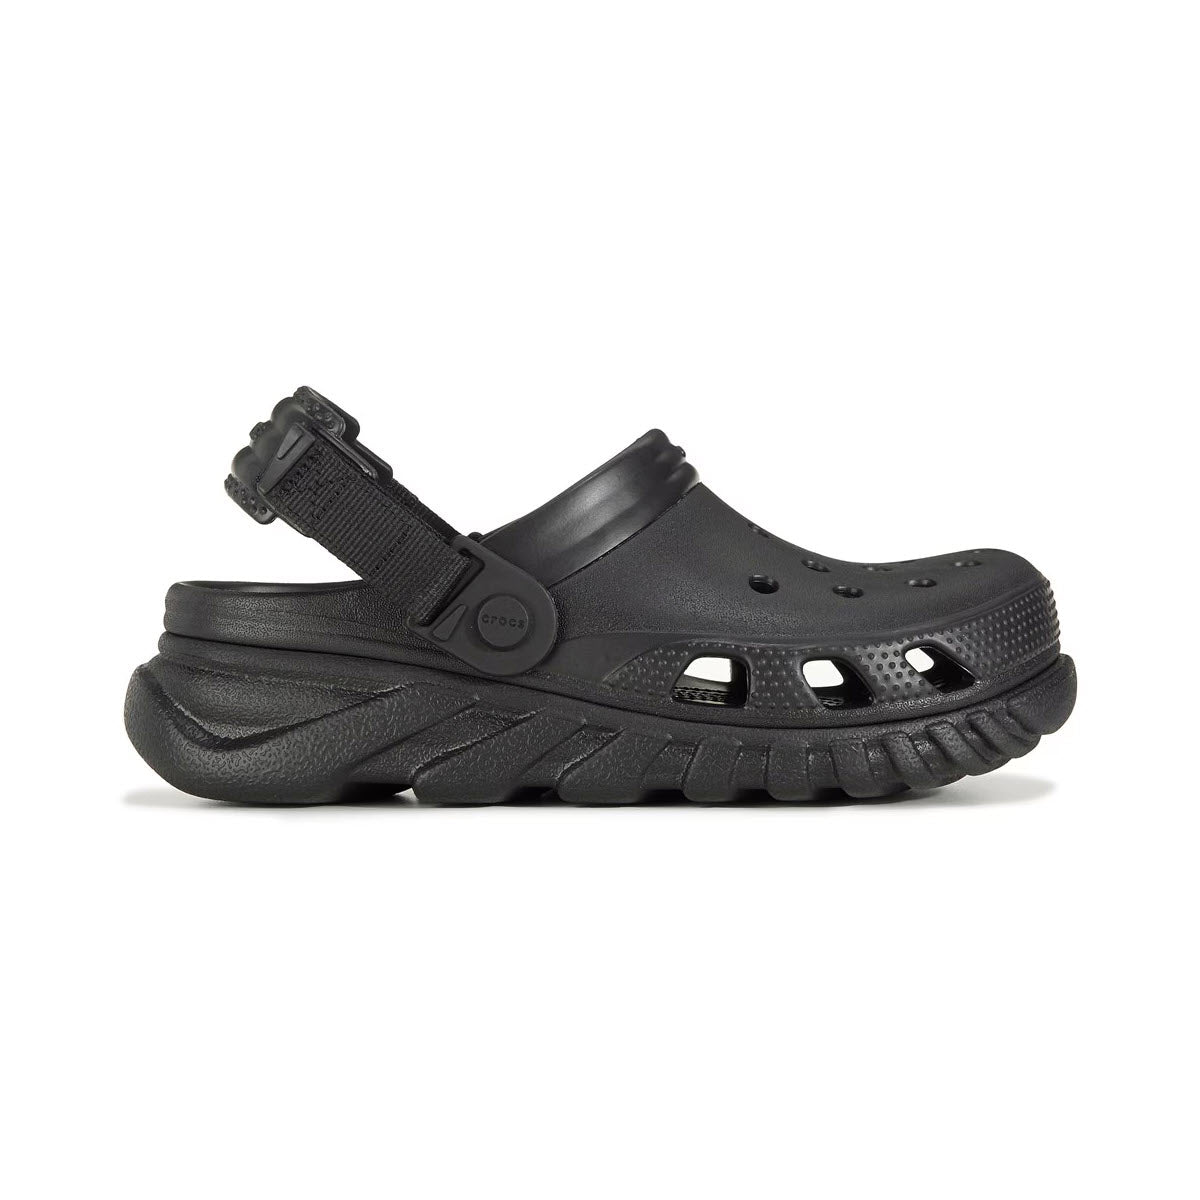 Sentence with replacement: Crocs Duet Max II Clog Black sandal with a thick, rugged sole and adjustable back straps, isolated on a white background.